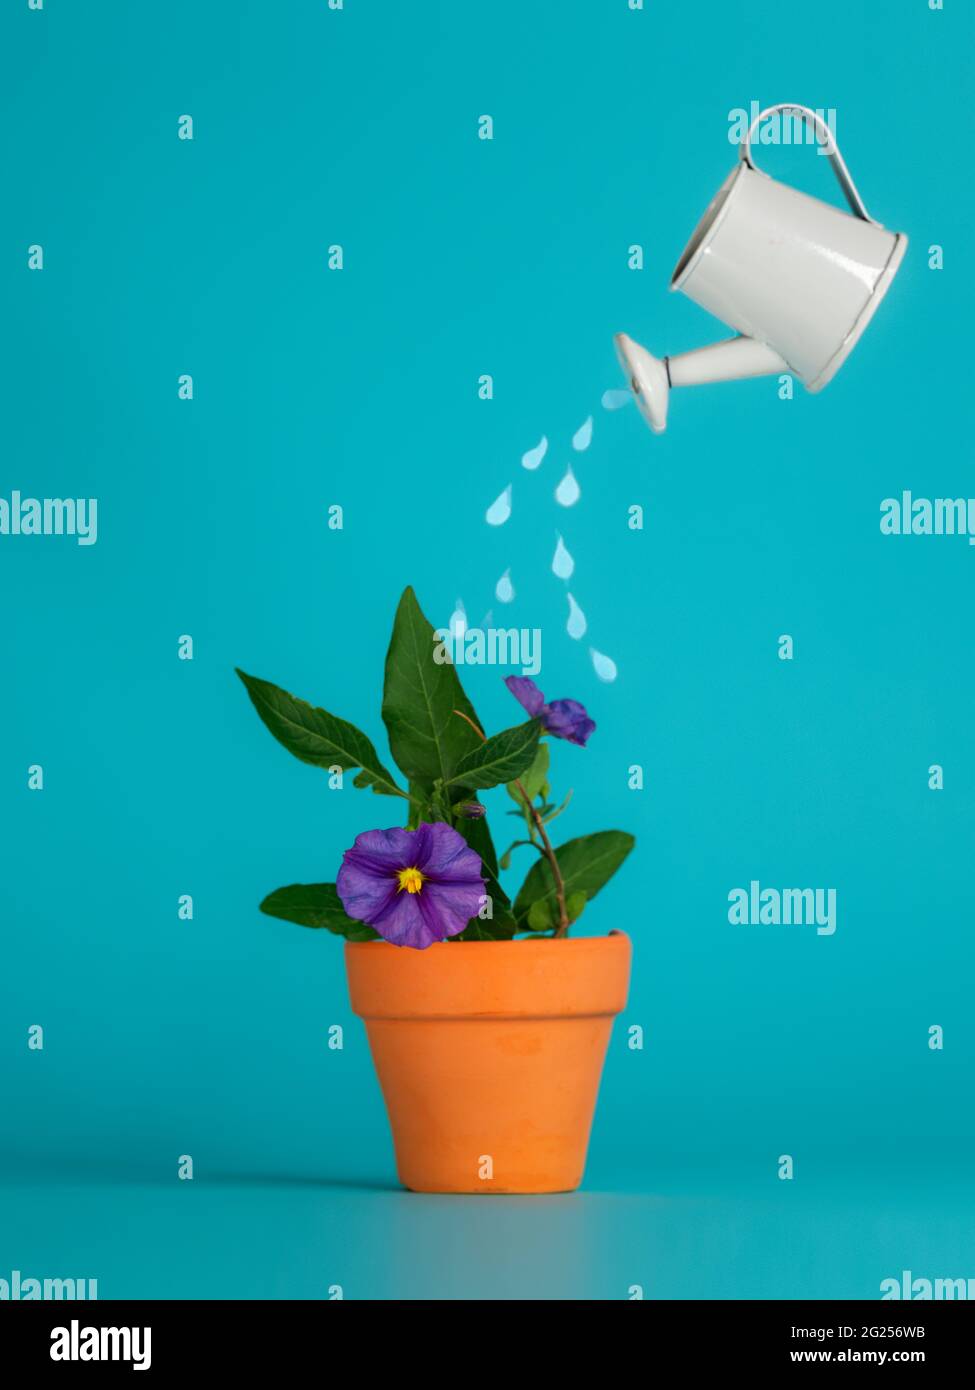 Conceptual watering can watering a flower in a plant pot Stock Photo